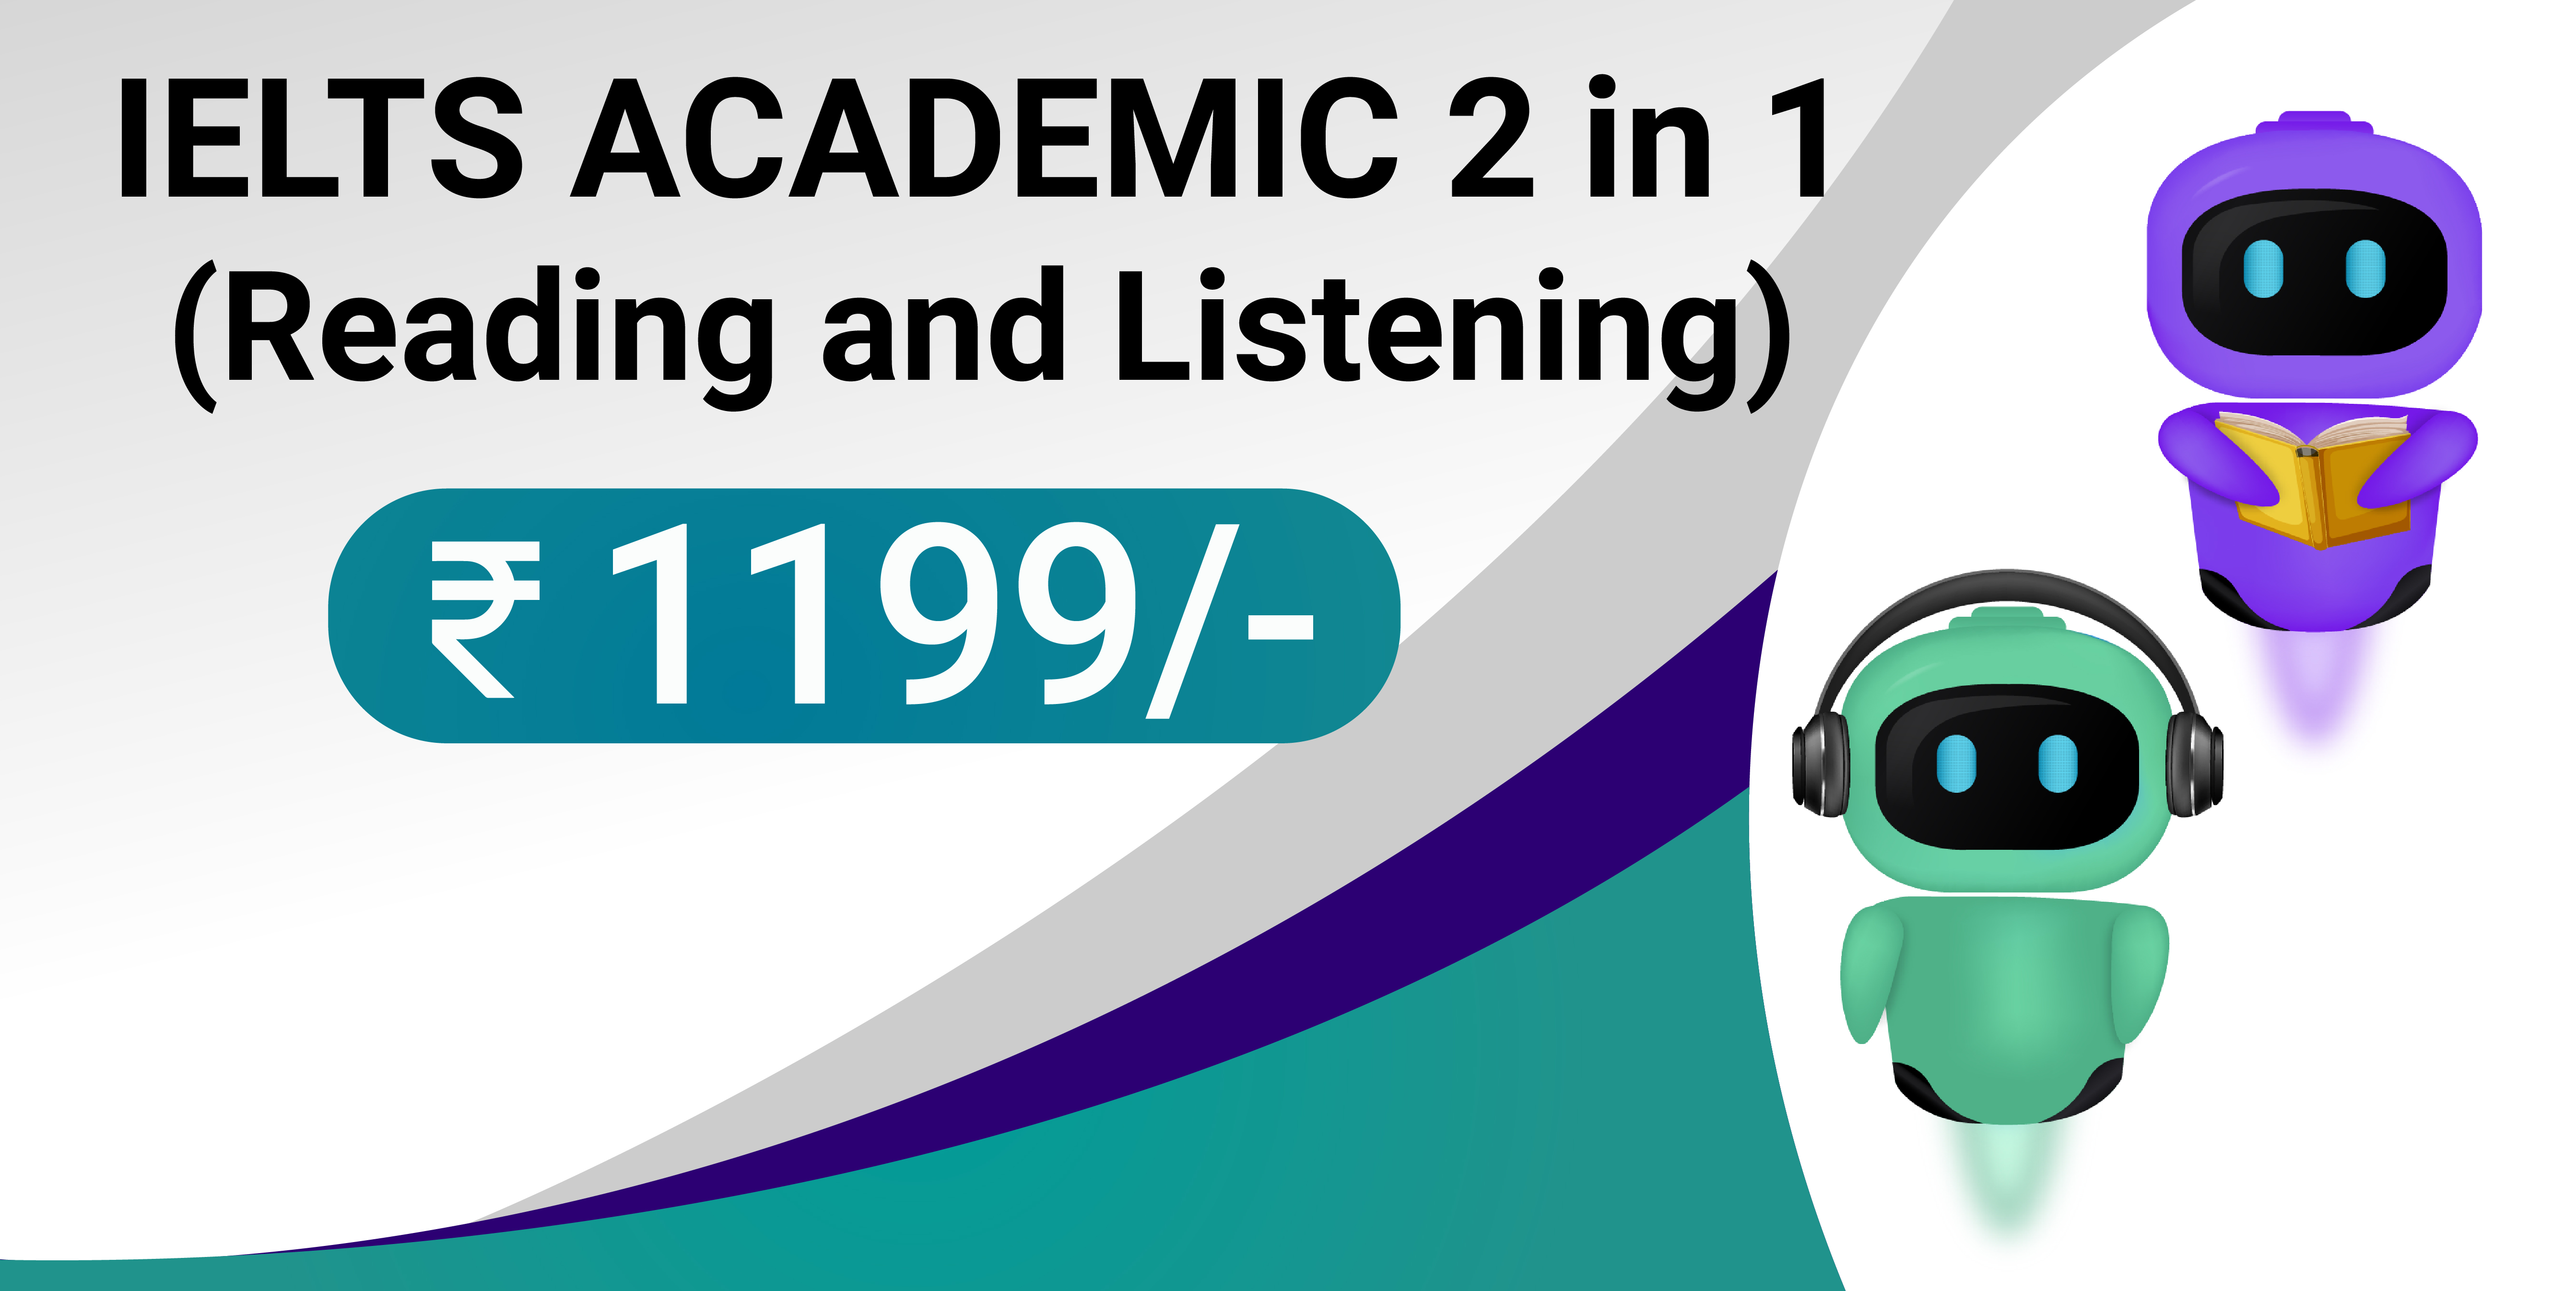 IELTS ACADEMIC 2 in 1 (Reading and Listening)